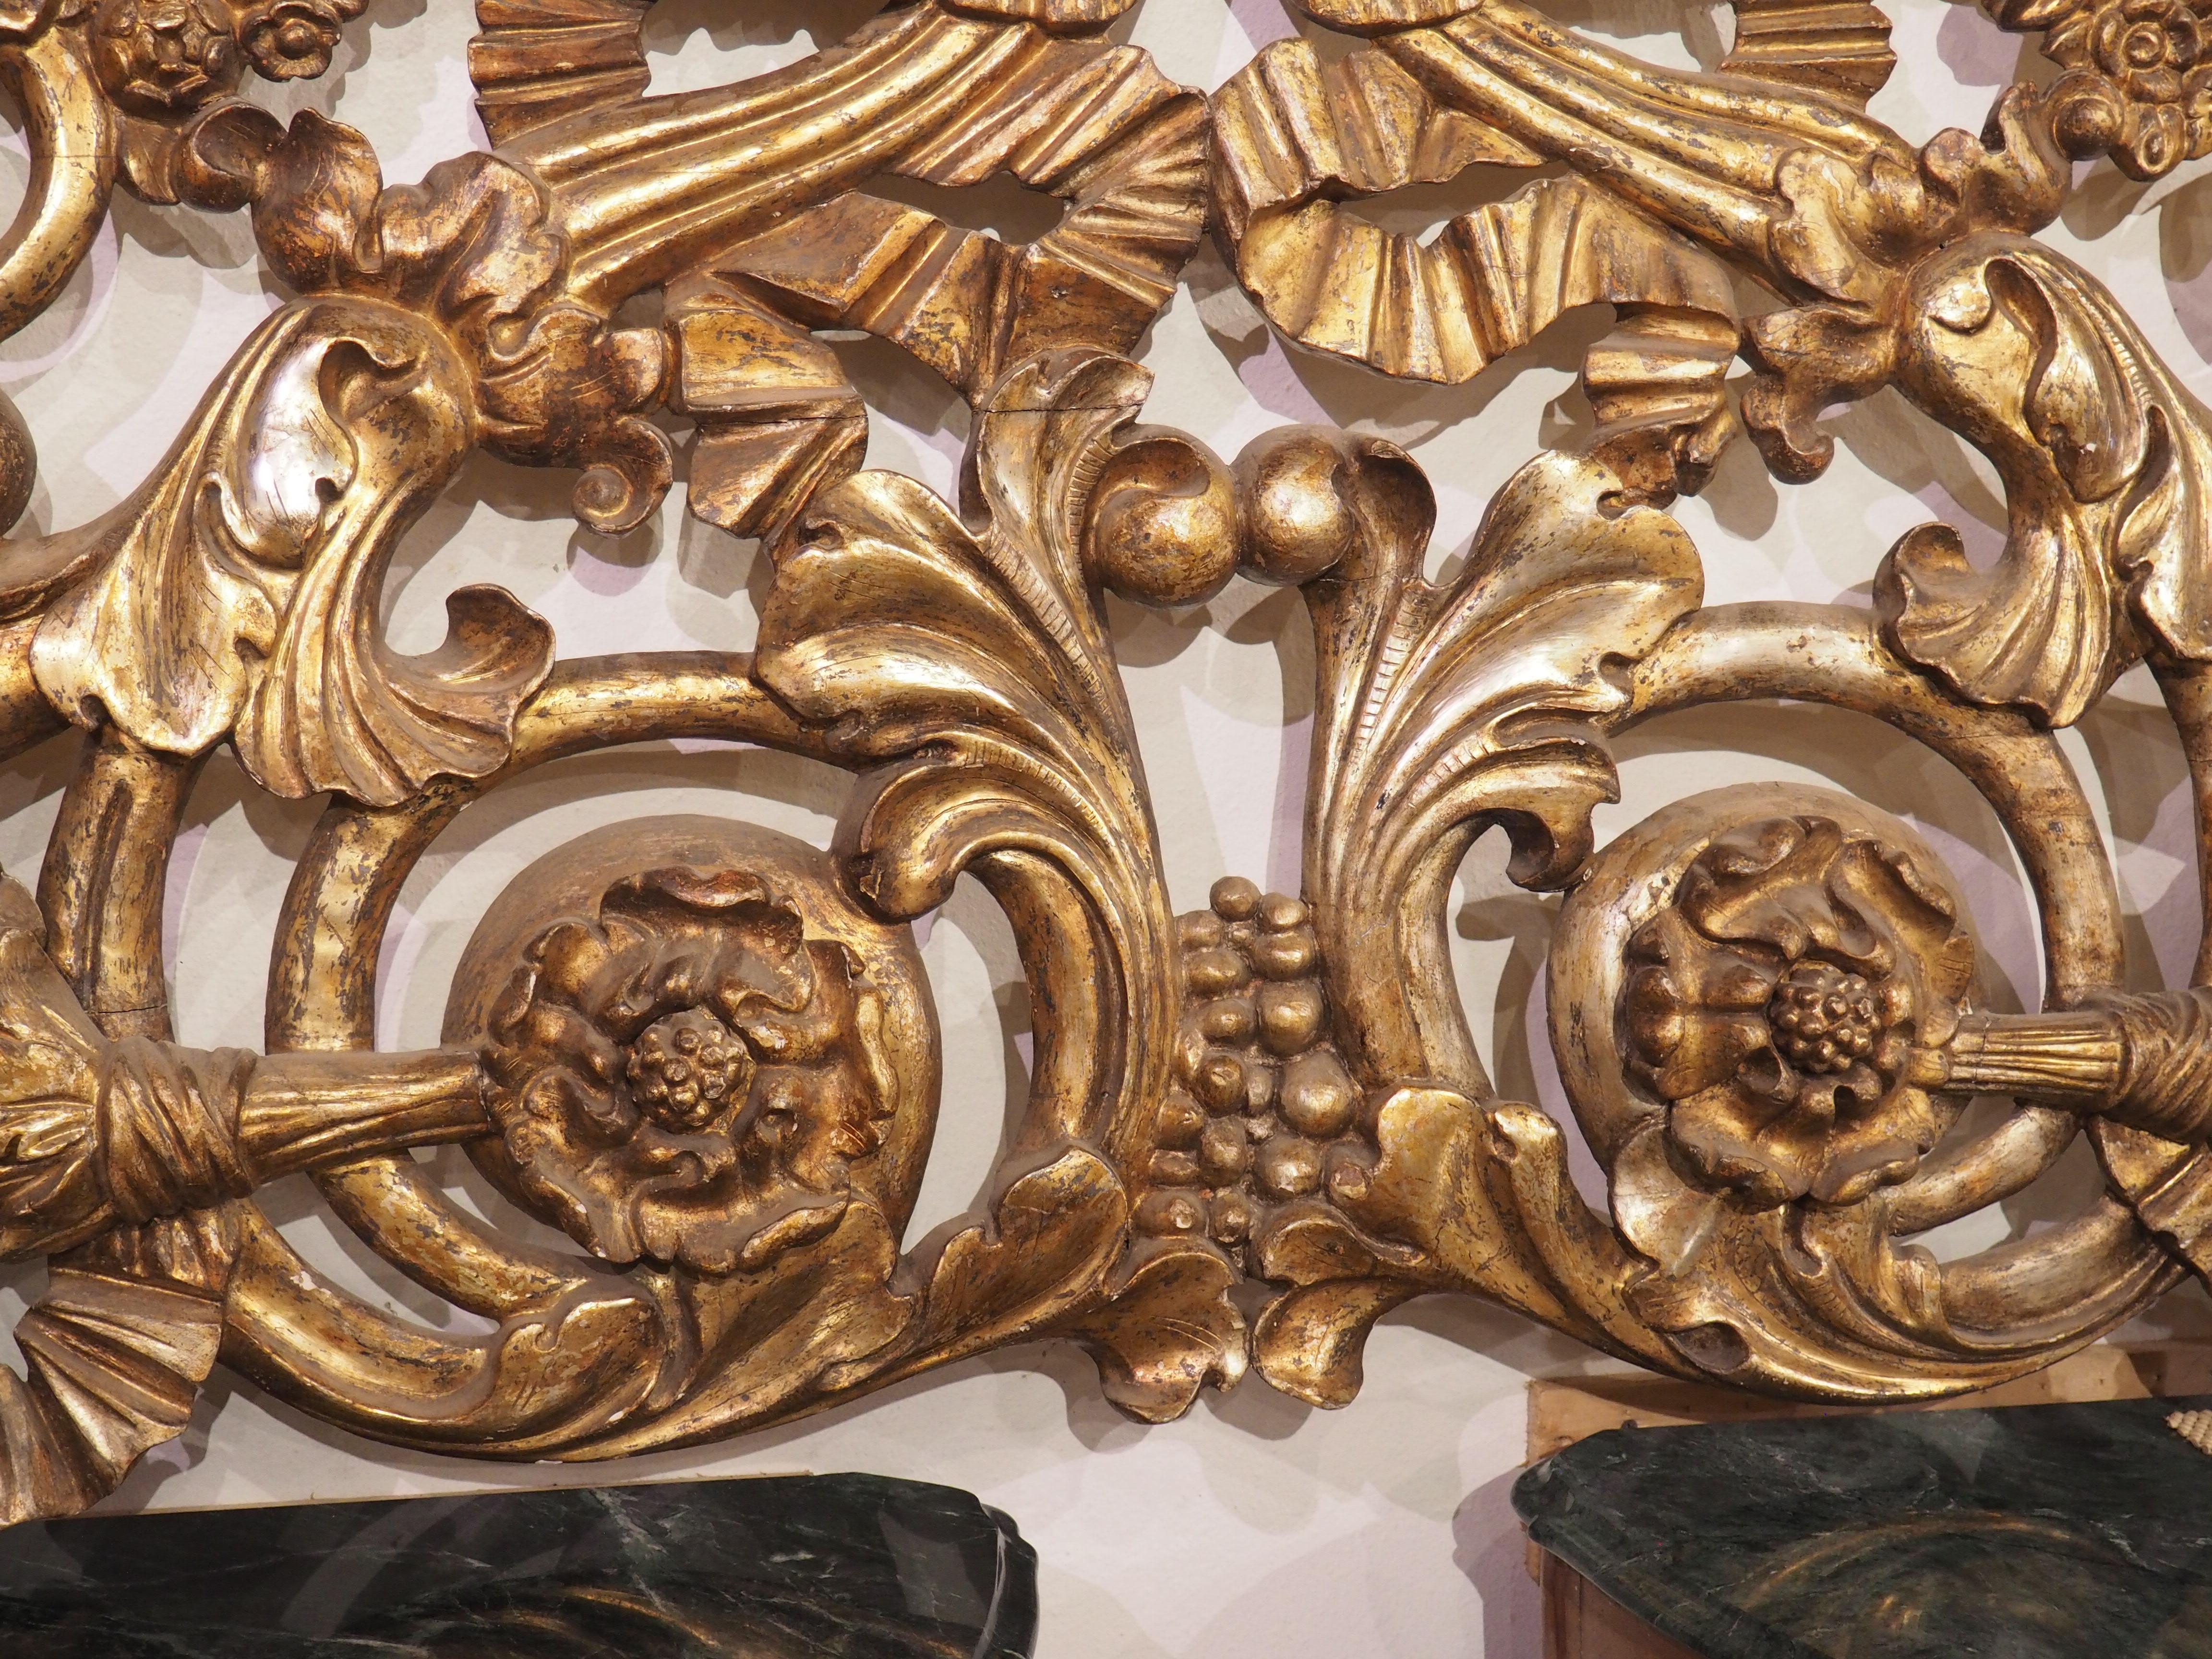 Large Circa 1850 Italian Giltwood Architectural Carving or Headboard 91.5 Inches In Good Condition For Sale In Dallas, TX